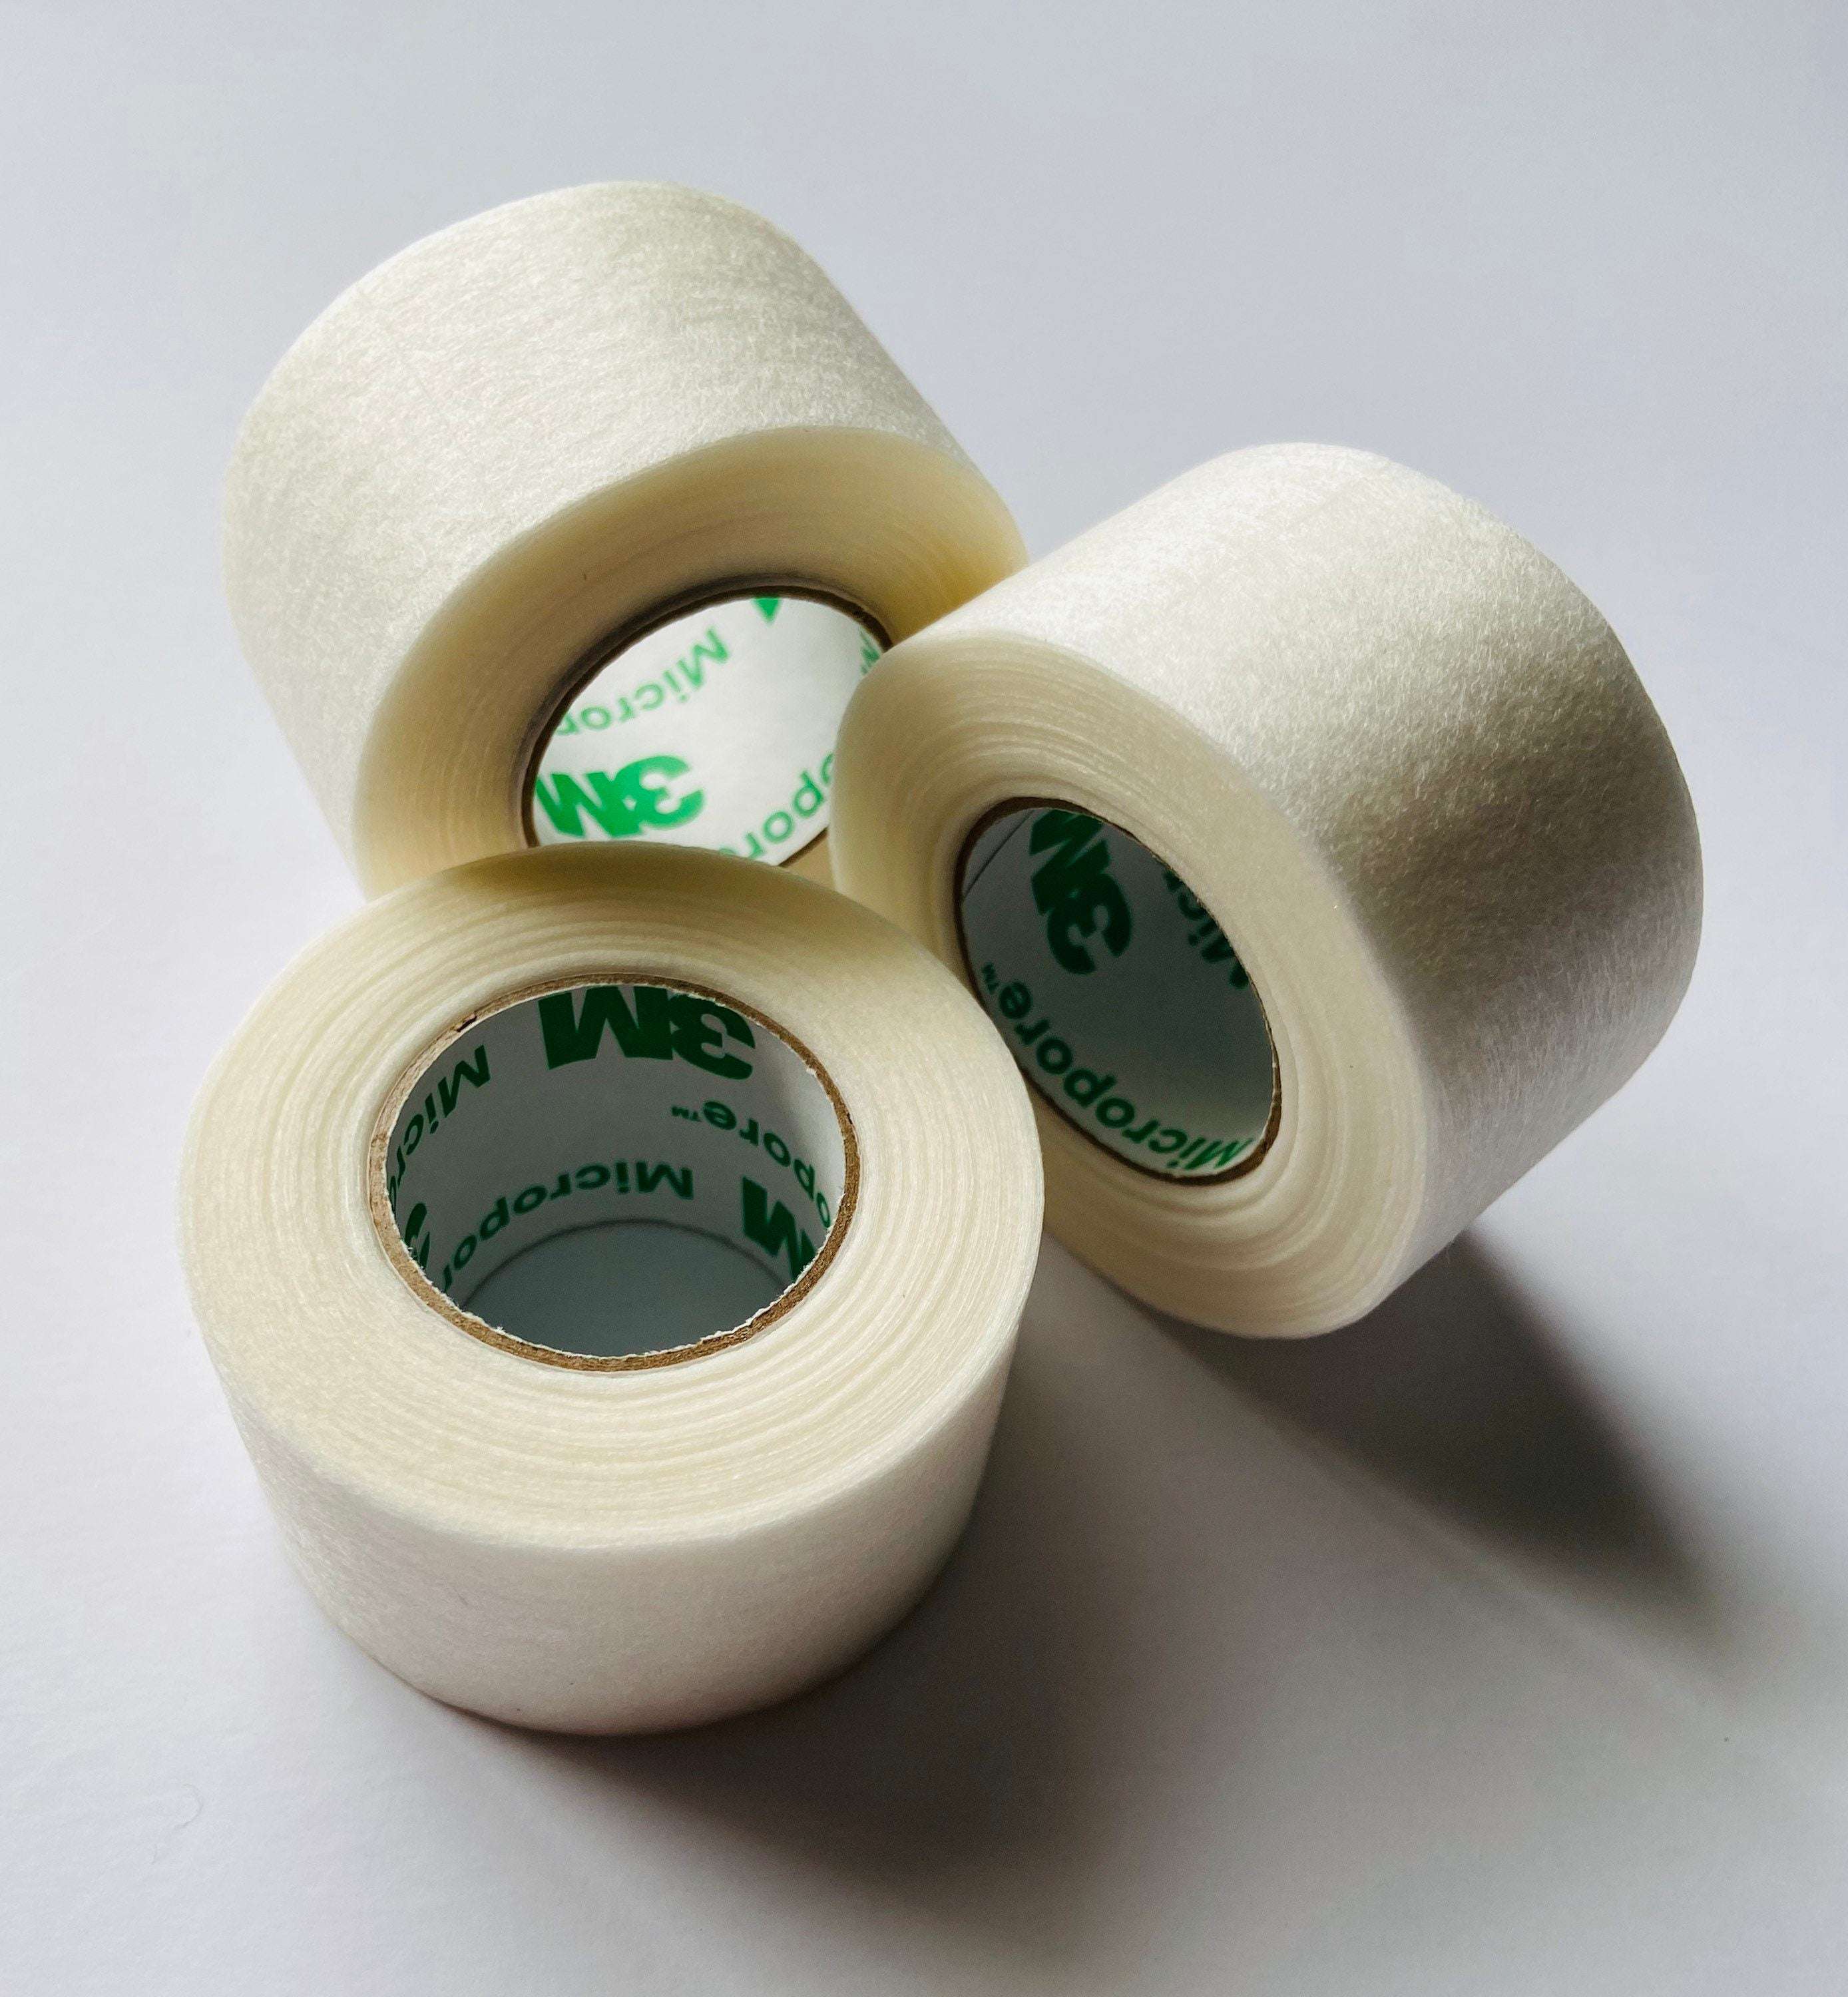 3M 1/2 x 10 Yard Micropore Surgical Tape